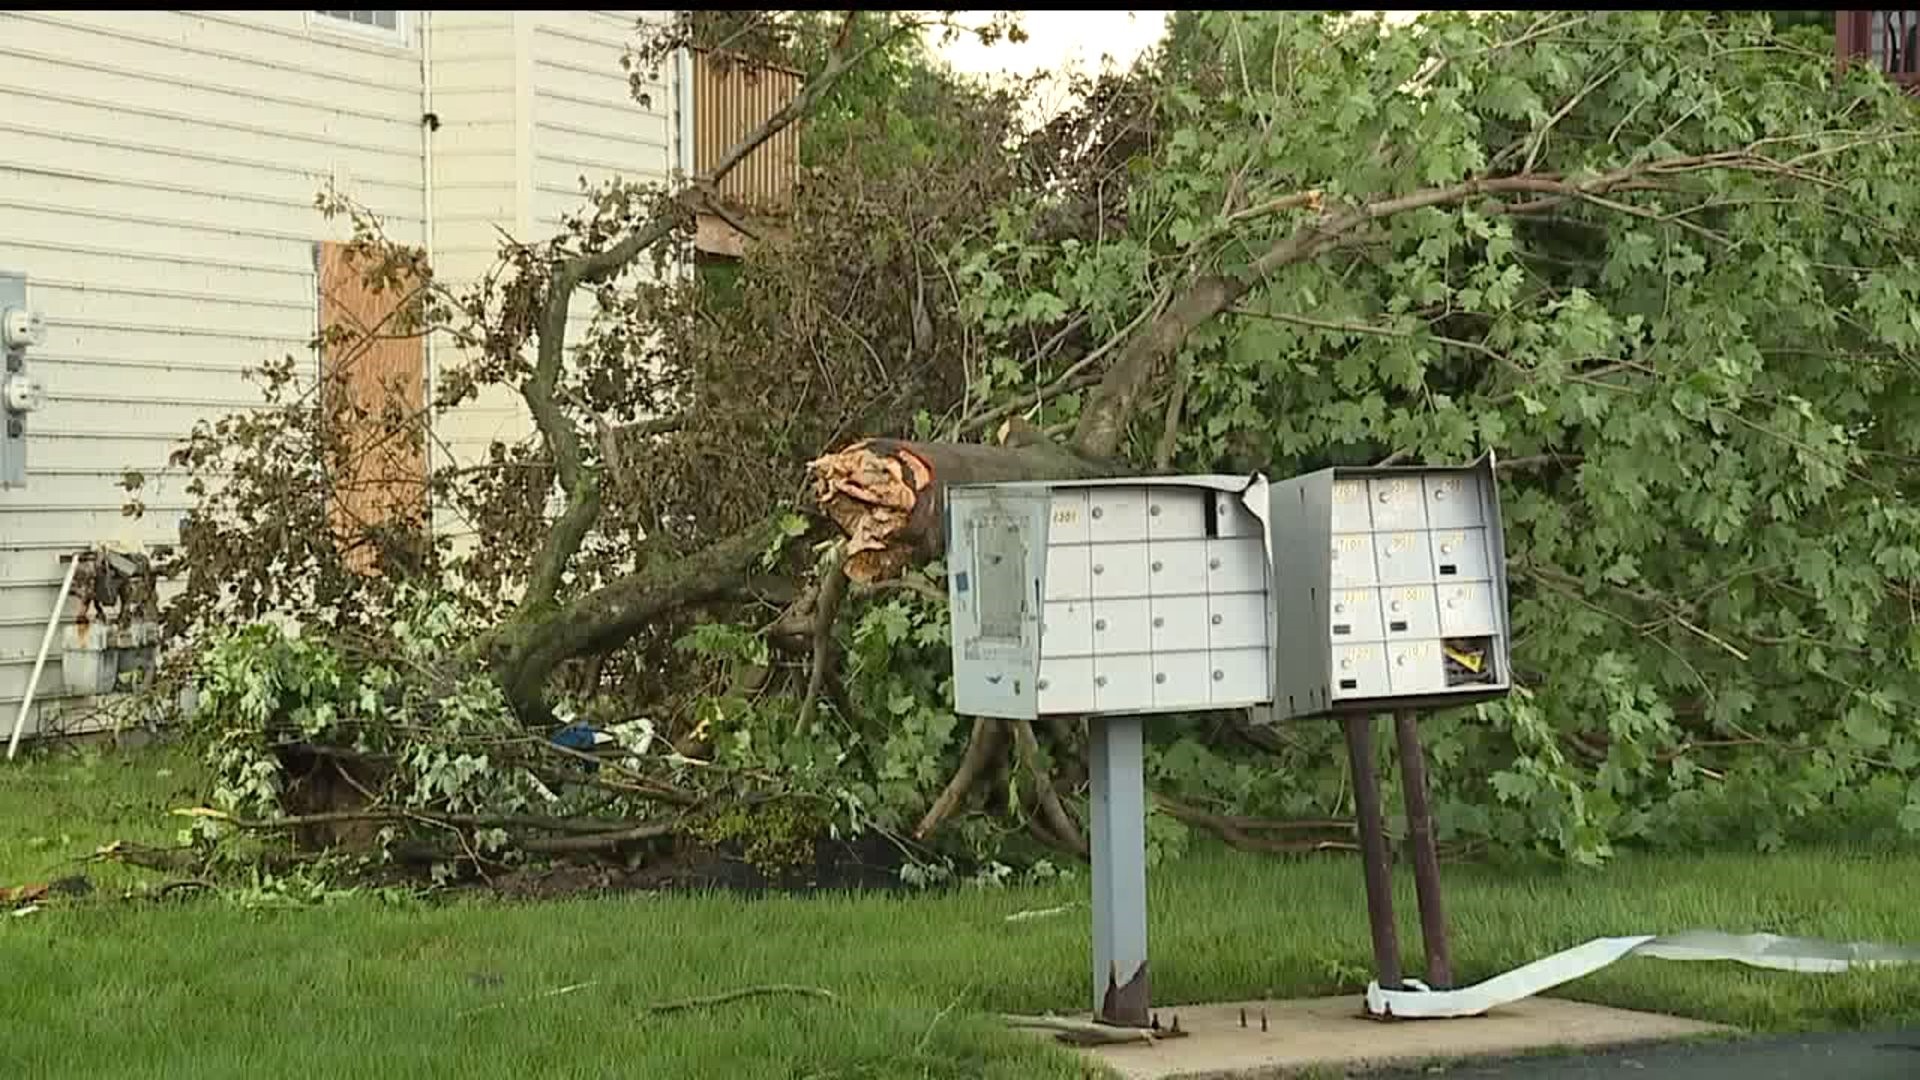 Residents dealing with tornado aftermath in Berks County